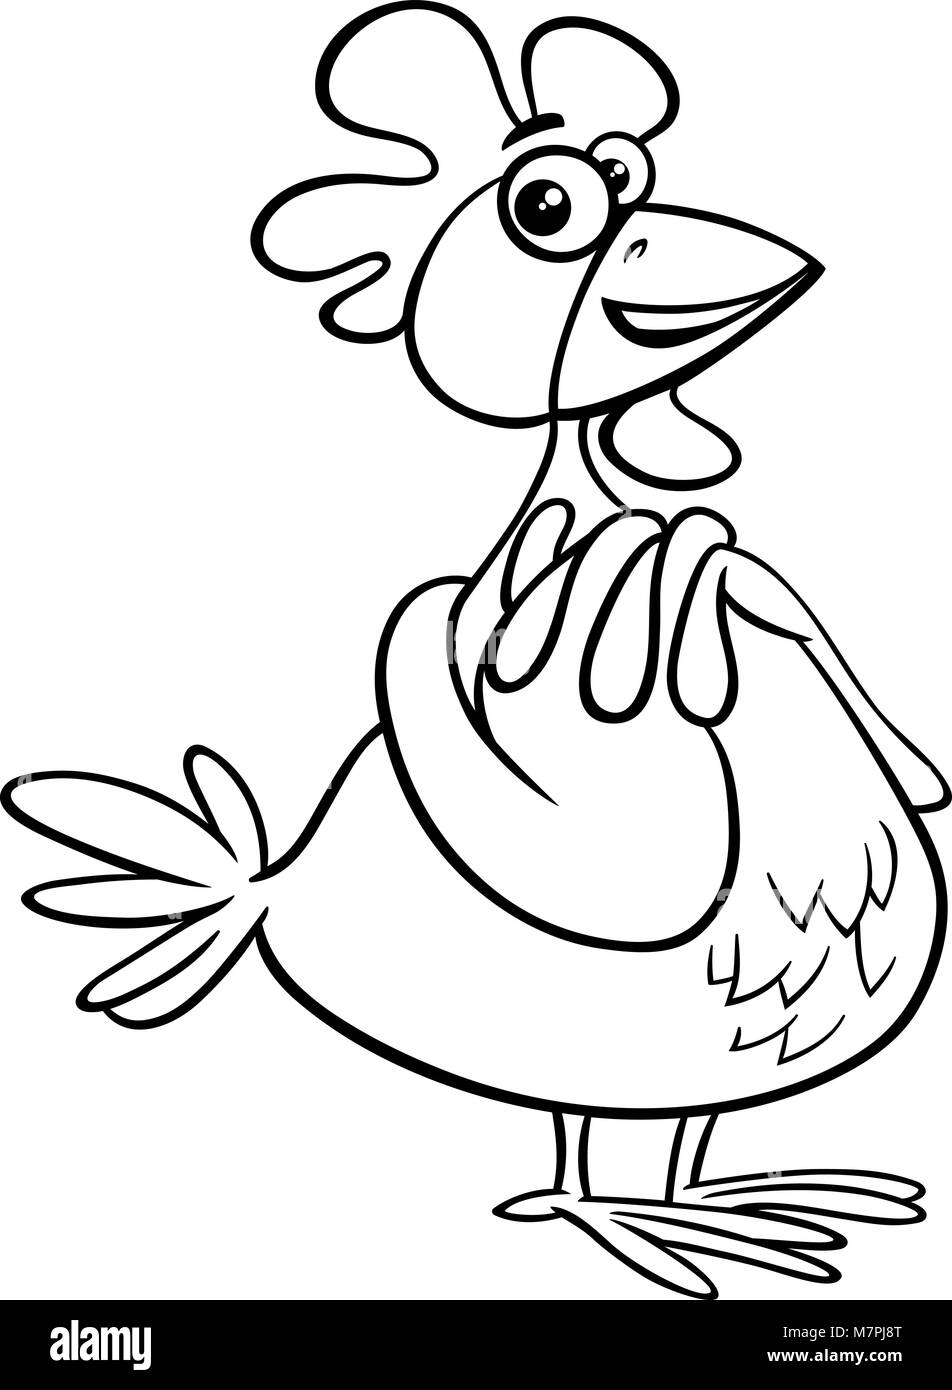 Cartoon hen Black and White Stock Photos & Images - Alamy